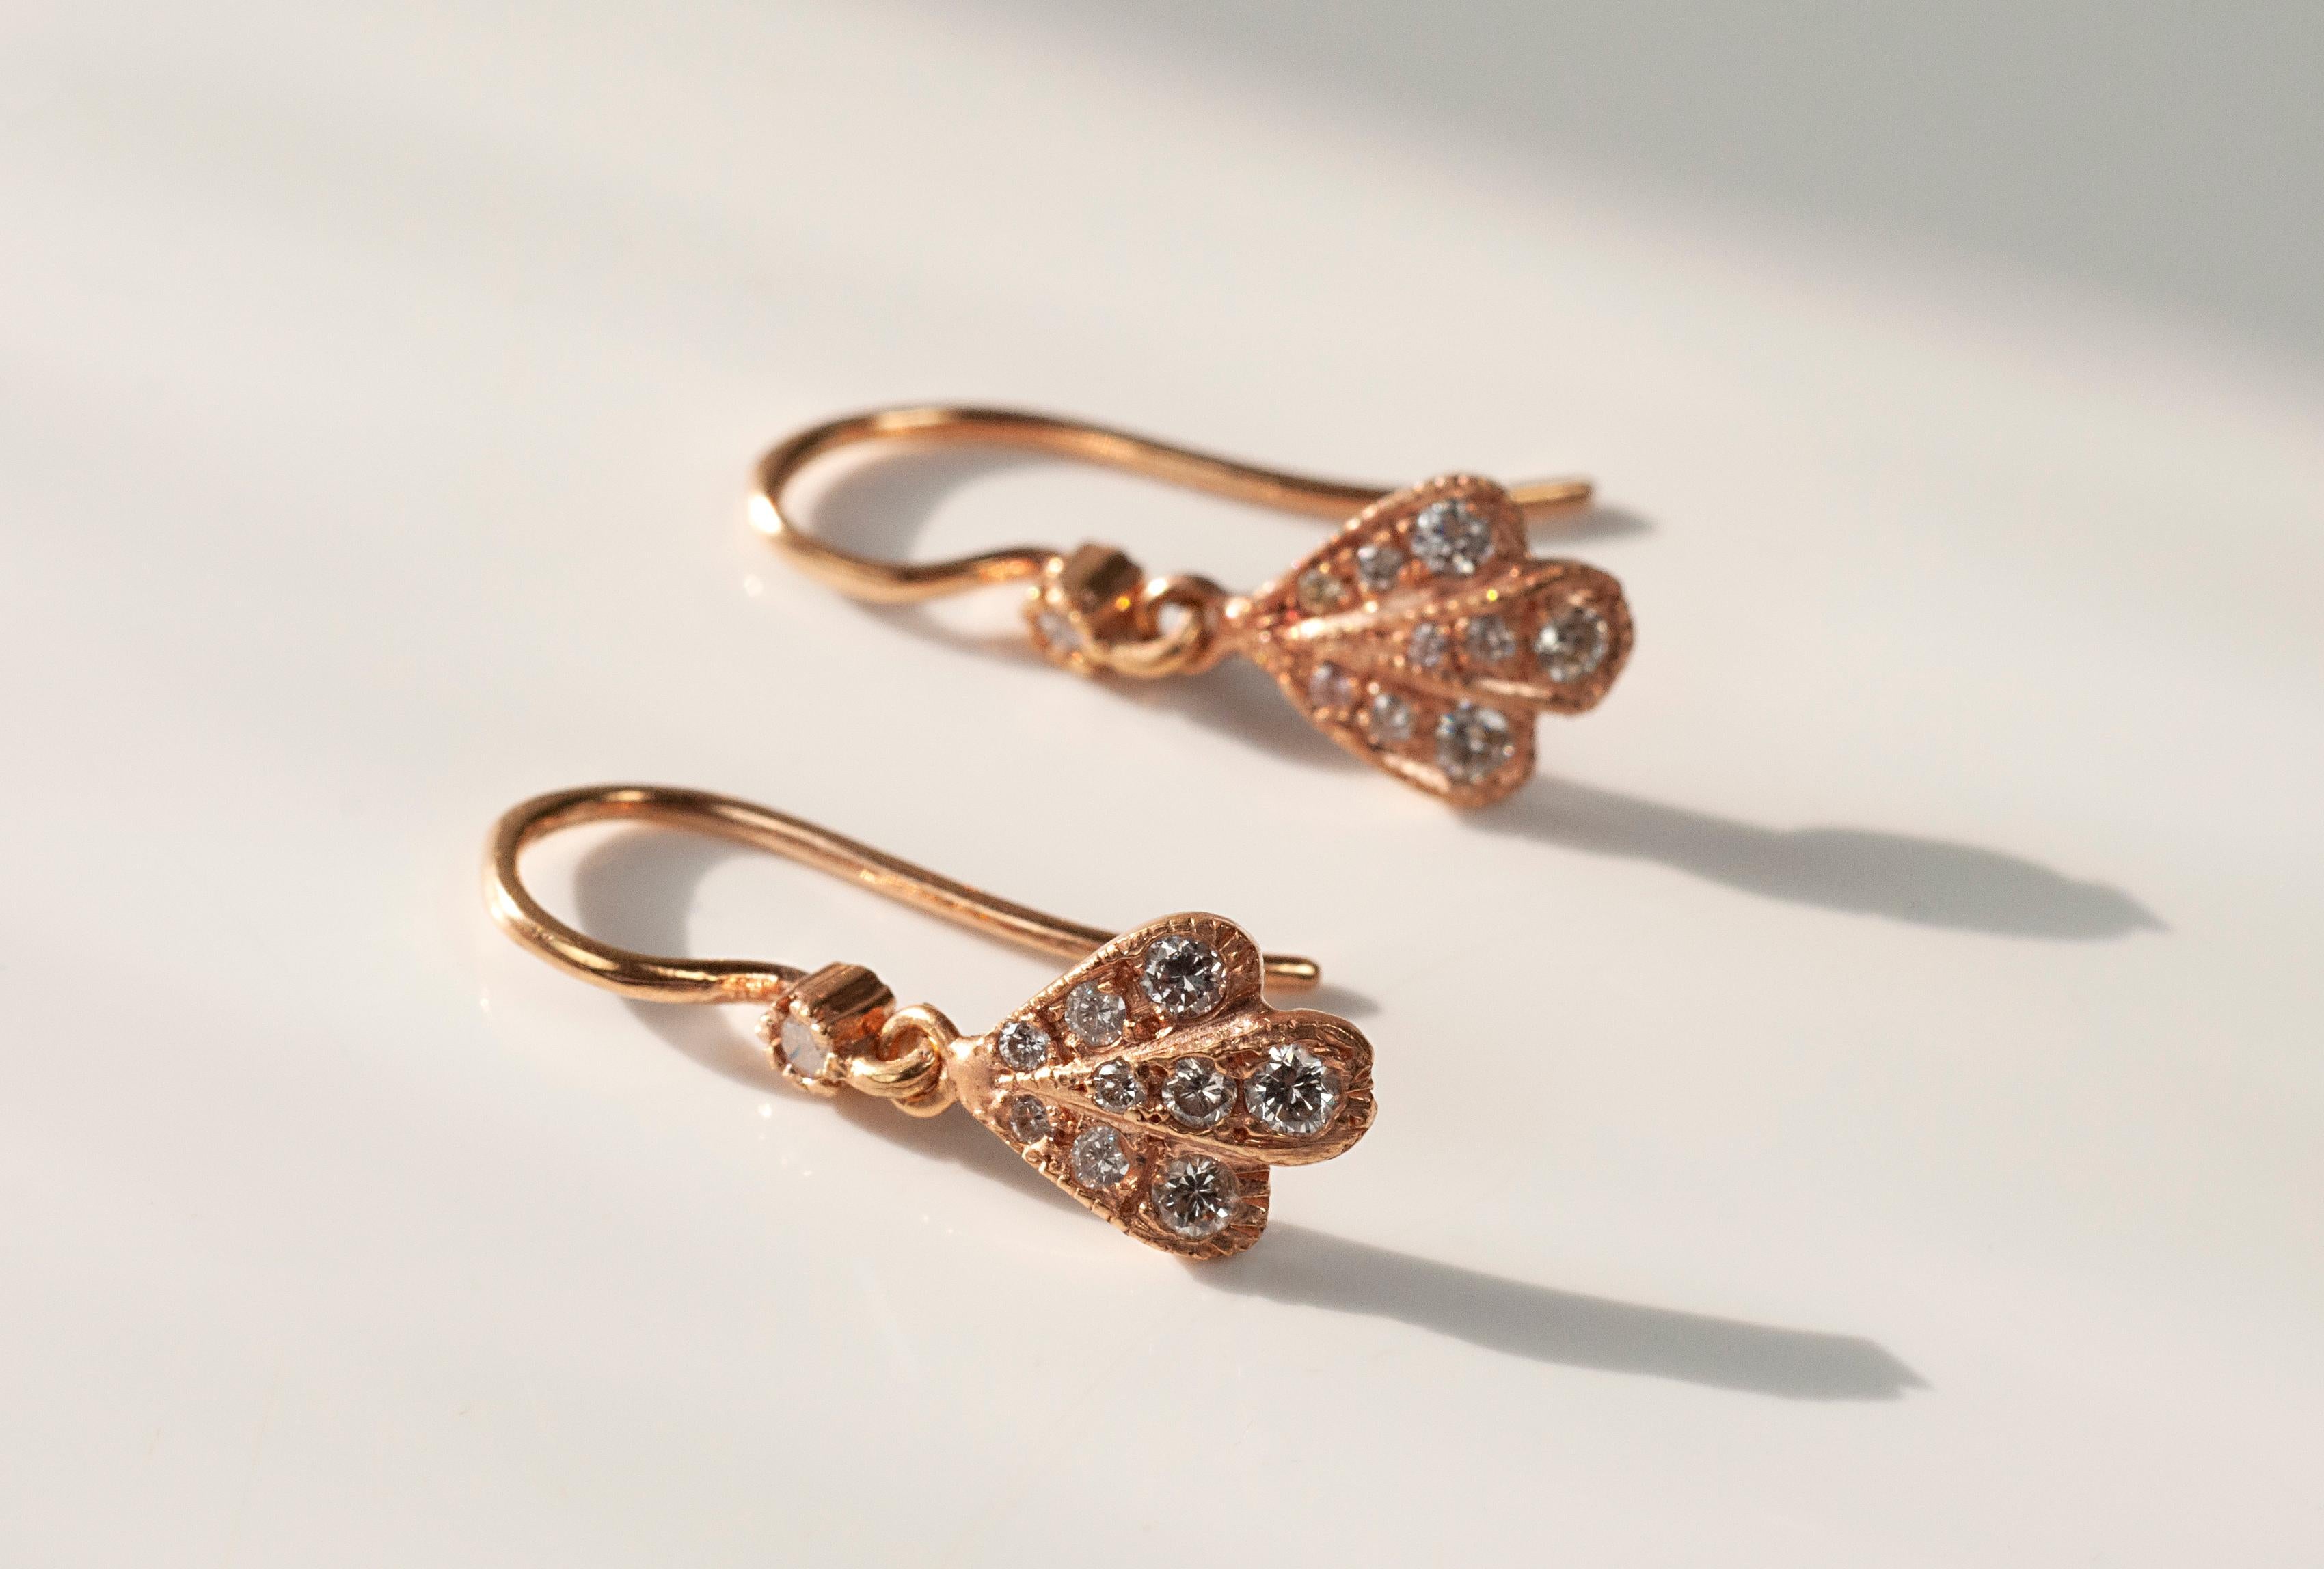 Rose gold flower petal drop earrings with white diamonds 0.22cts and french earwire. This pair of floral-inspired earrings show the Indian design influences of the designer while remaining clearly contemporary.
